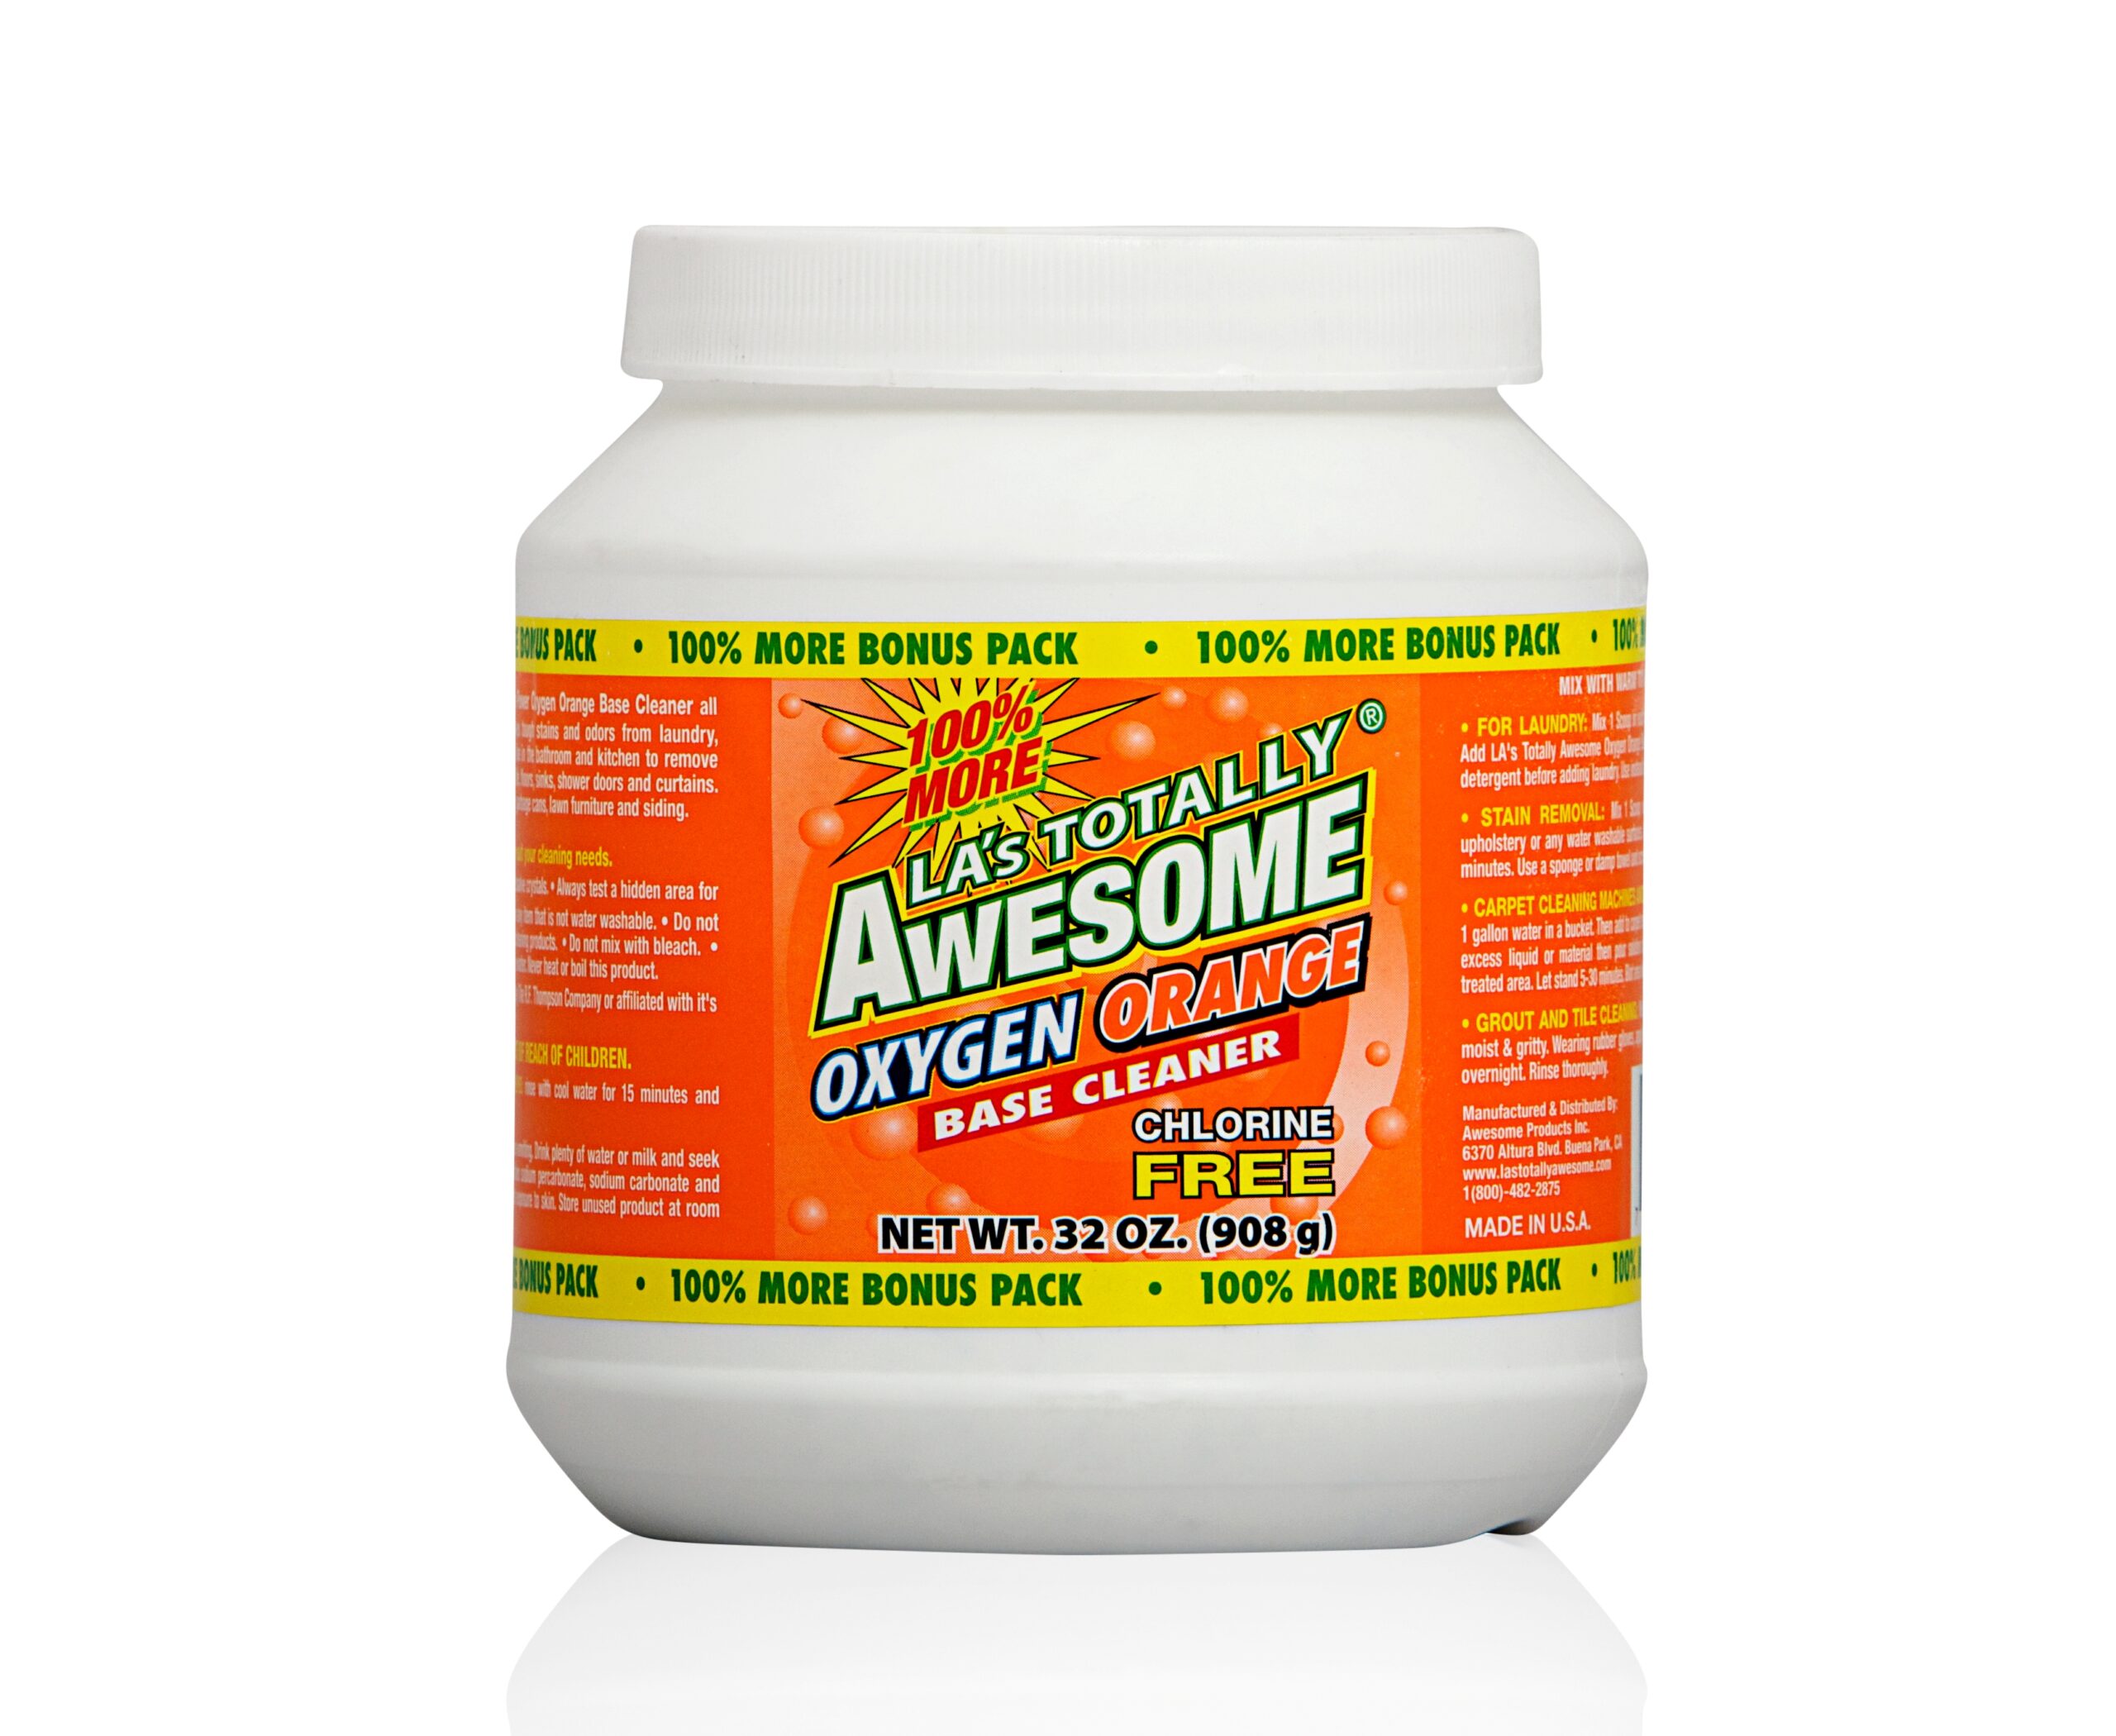 Awesome Oxygen Orange Spot Remover